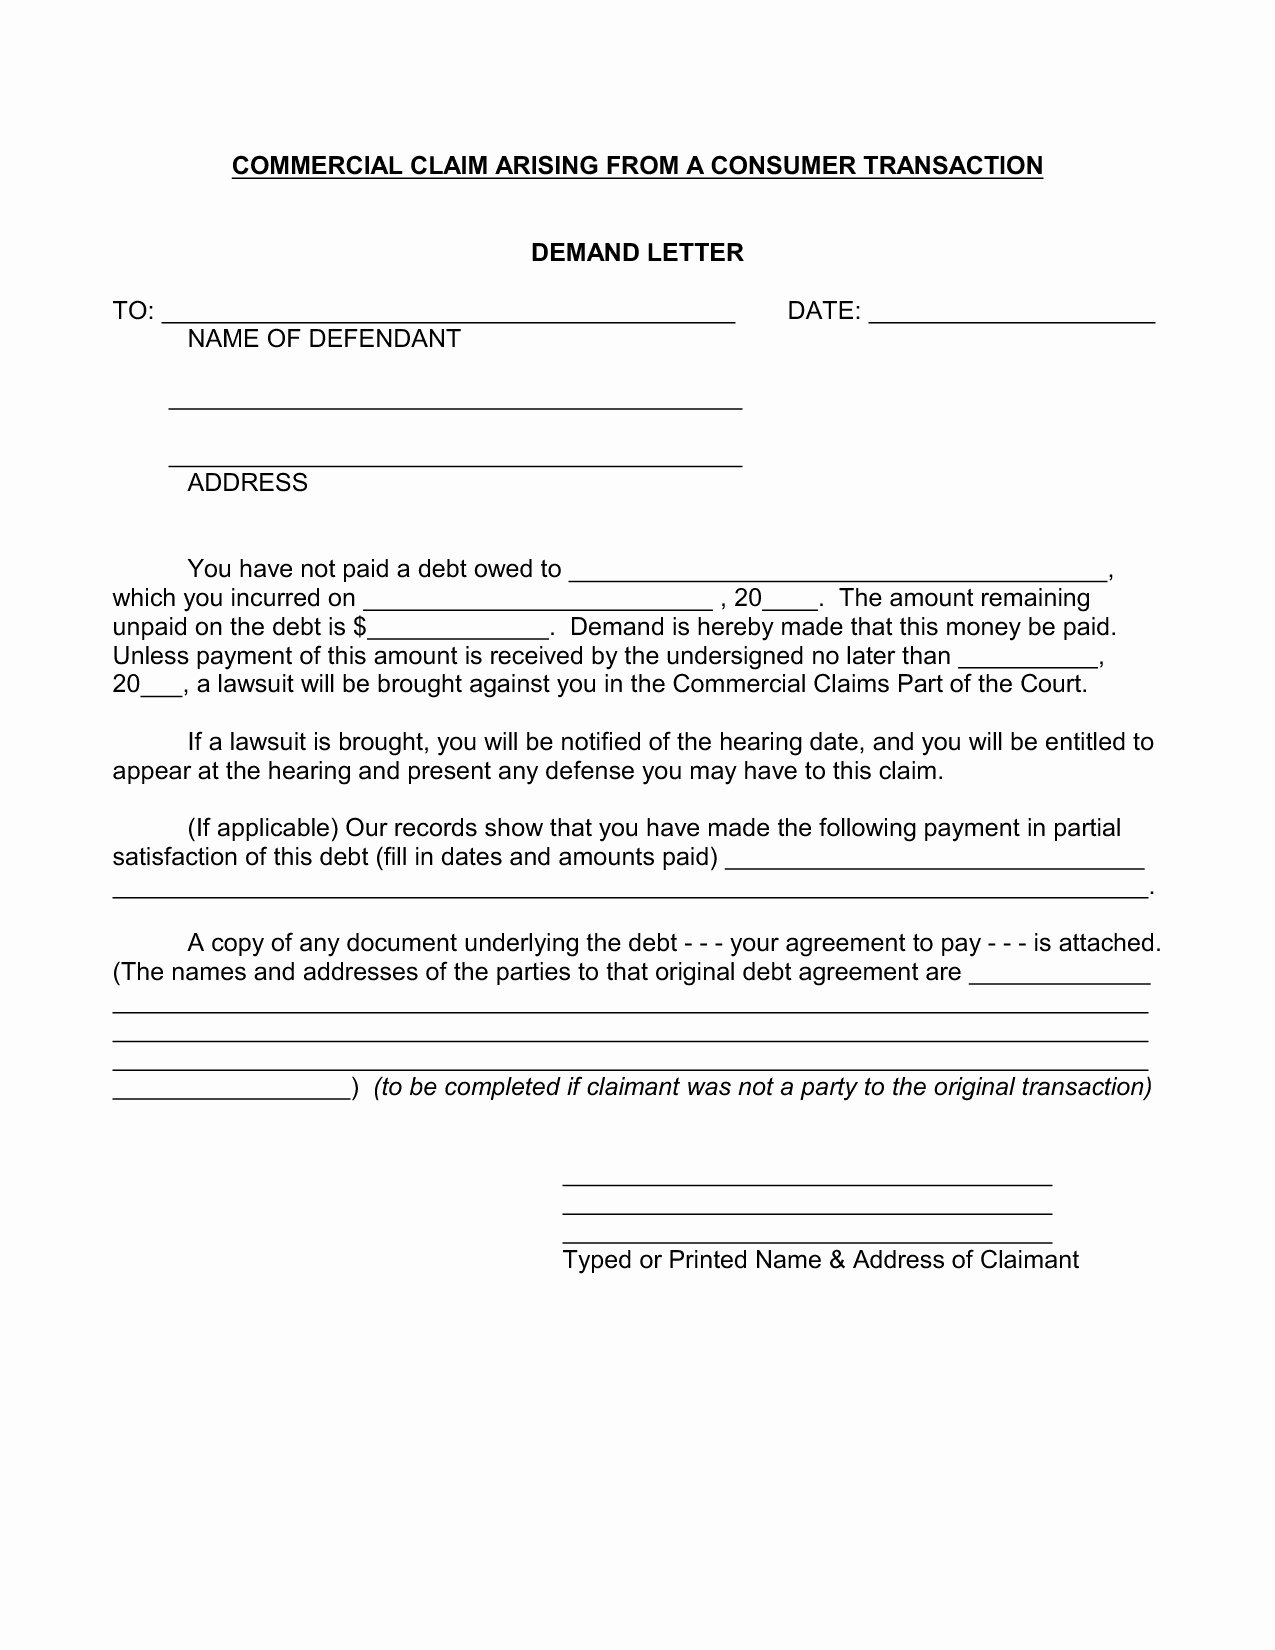 Contract for Money Owed Template Lovely Agreement to Pay Money Owed Perfect Letter Templates for